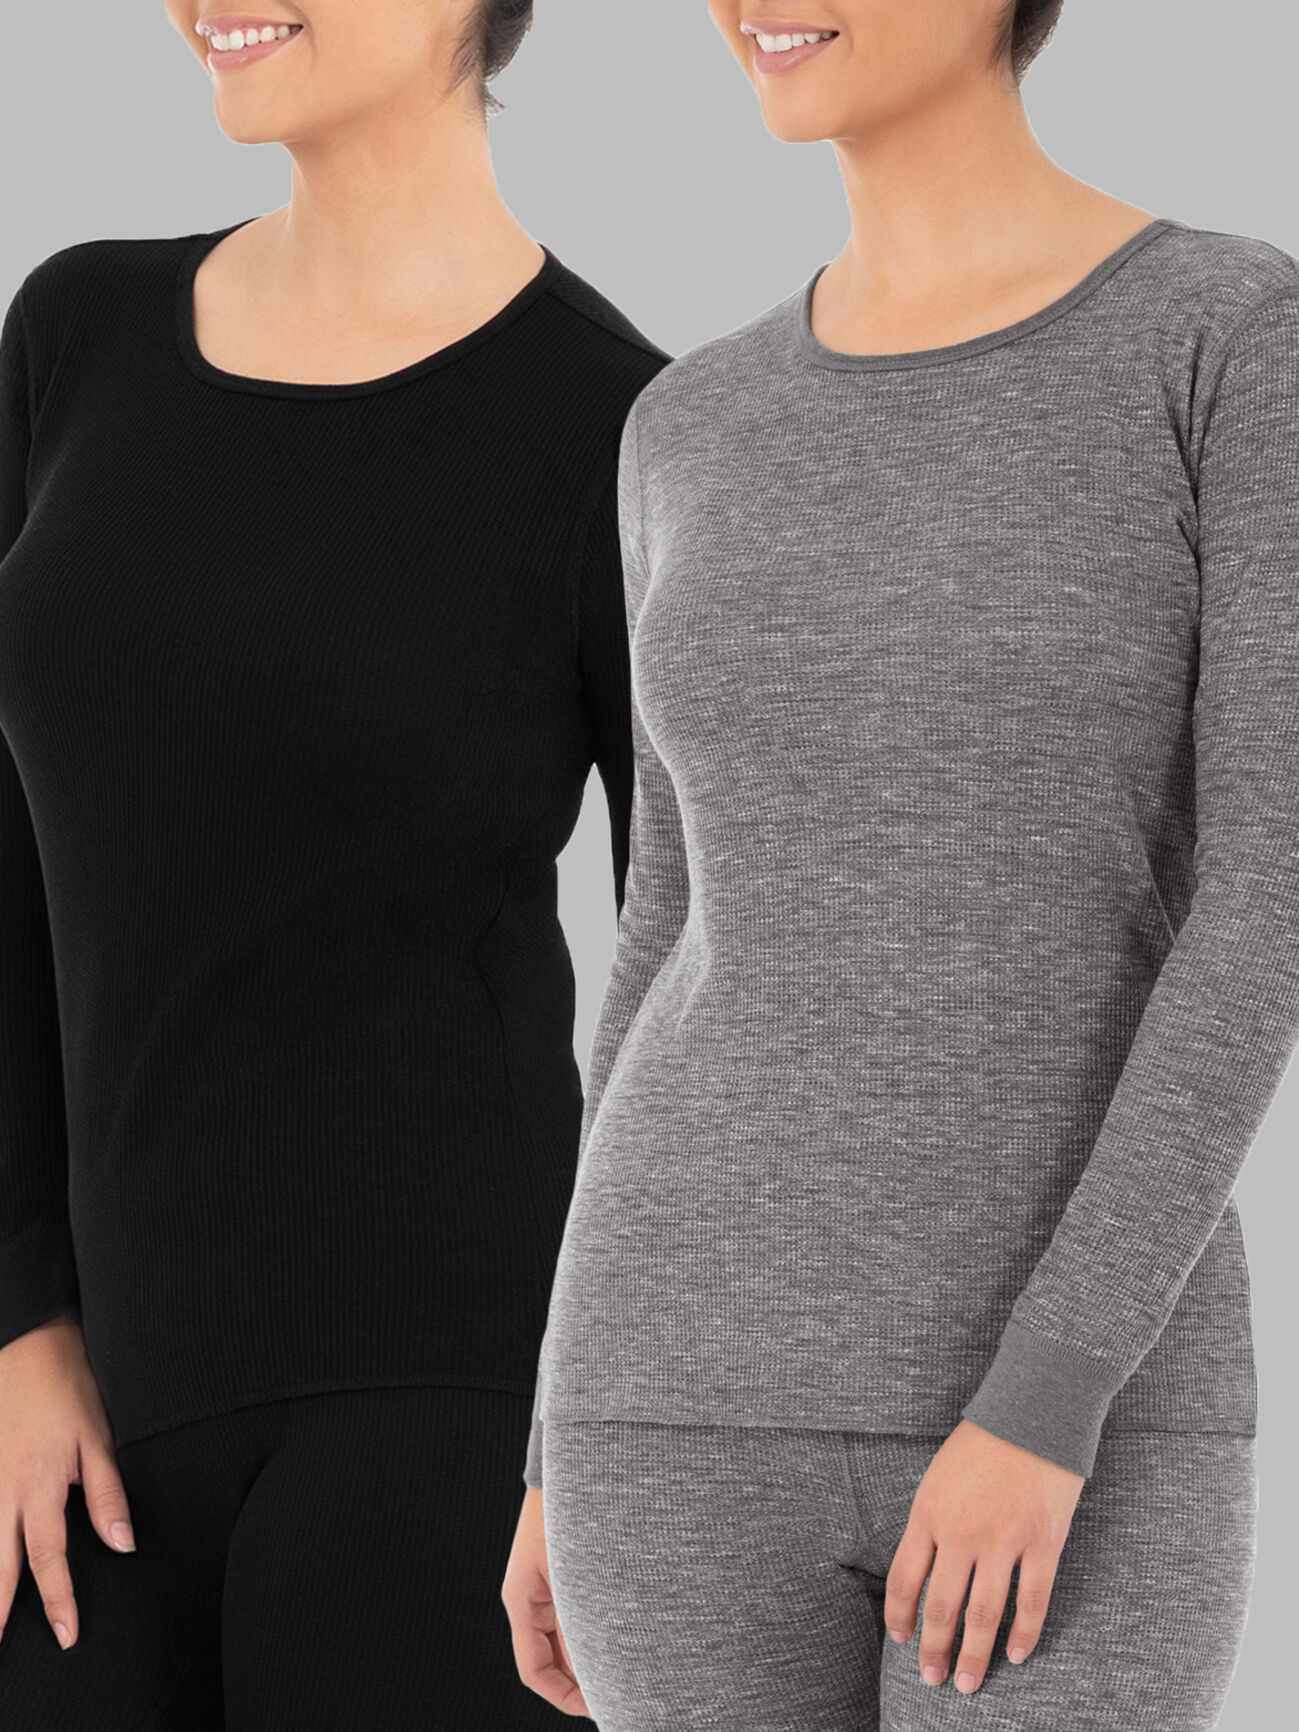 Women's Plus Size Waffle Thermal Bottom, 2 Pack